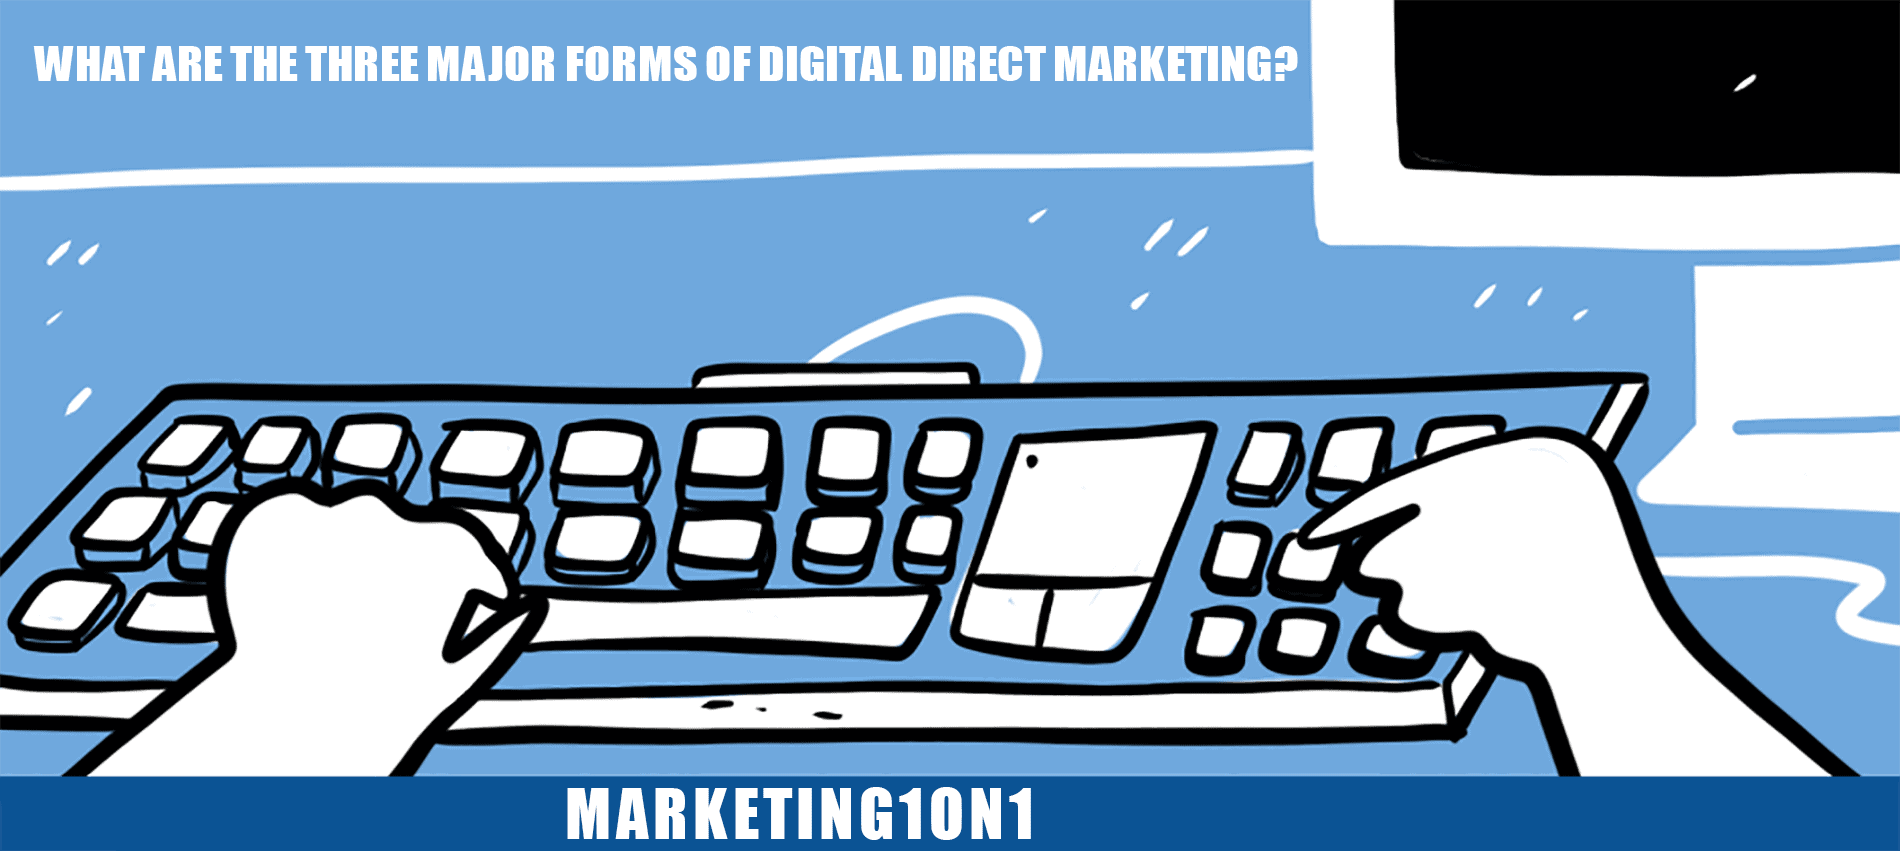 What are the three major forms of digital direct marketing?